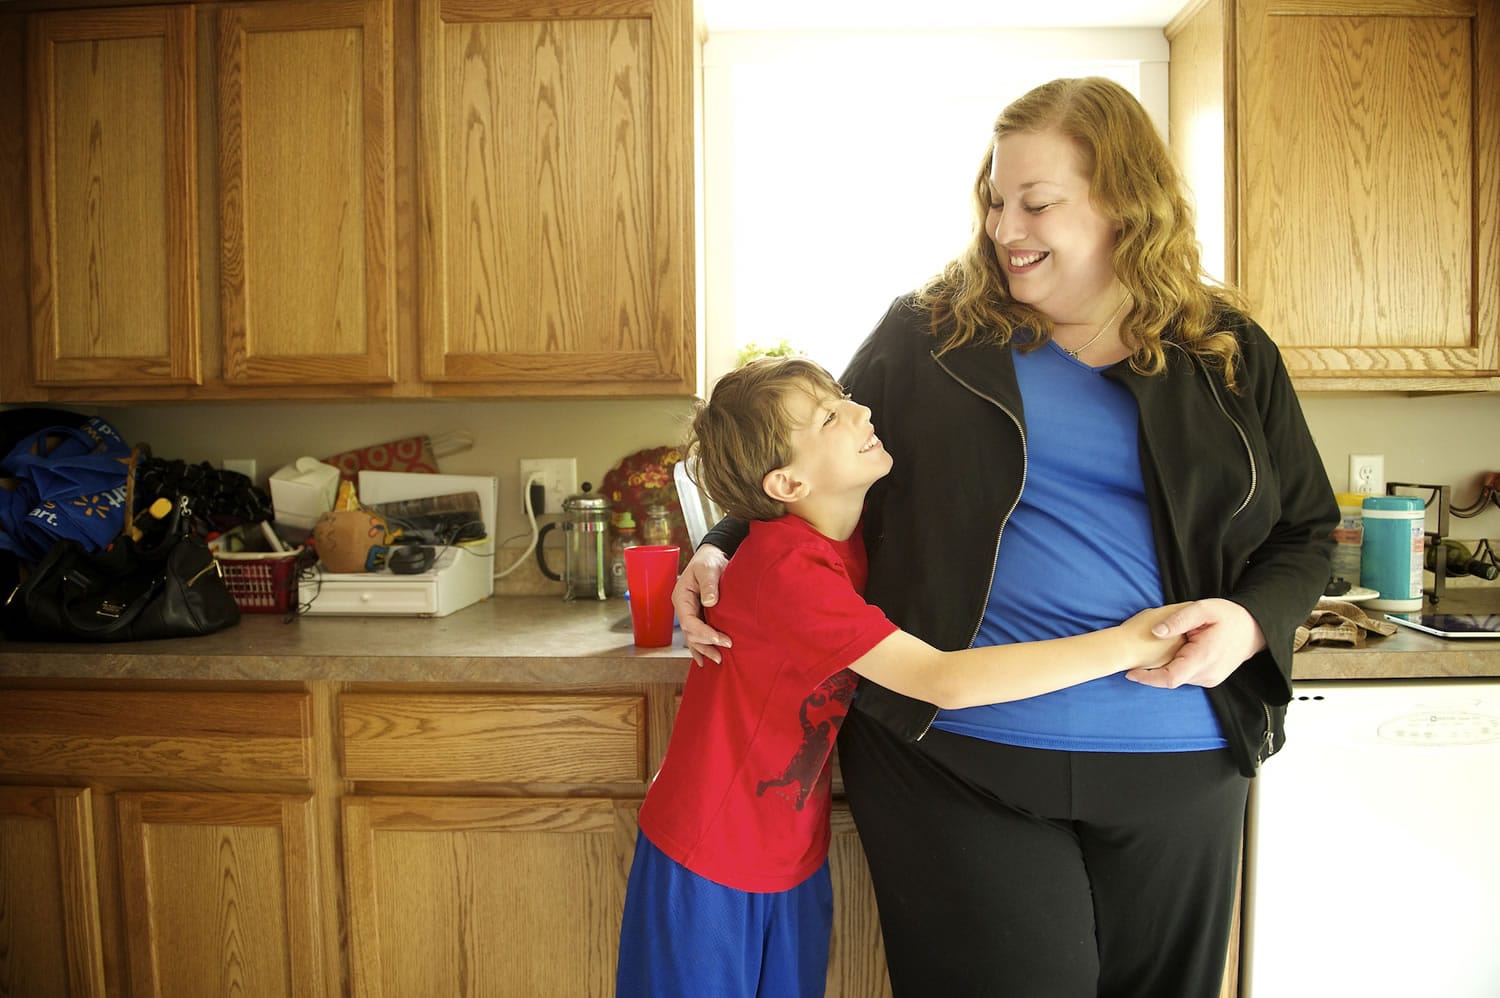 Laina Harris shares a moment with her 10-year-old son, Cameron, in the kitchen of the family's Camas home.